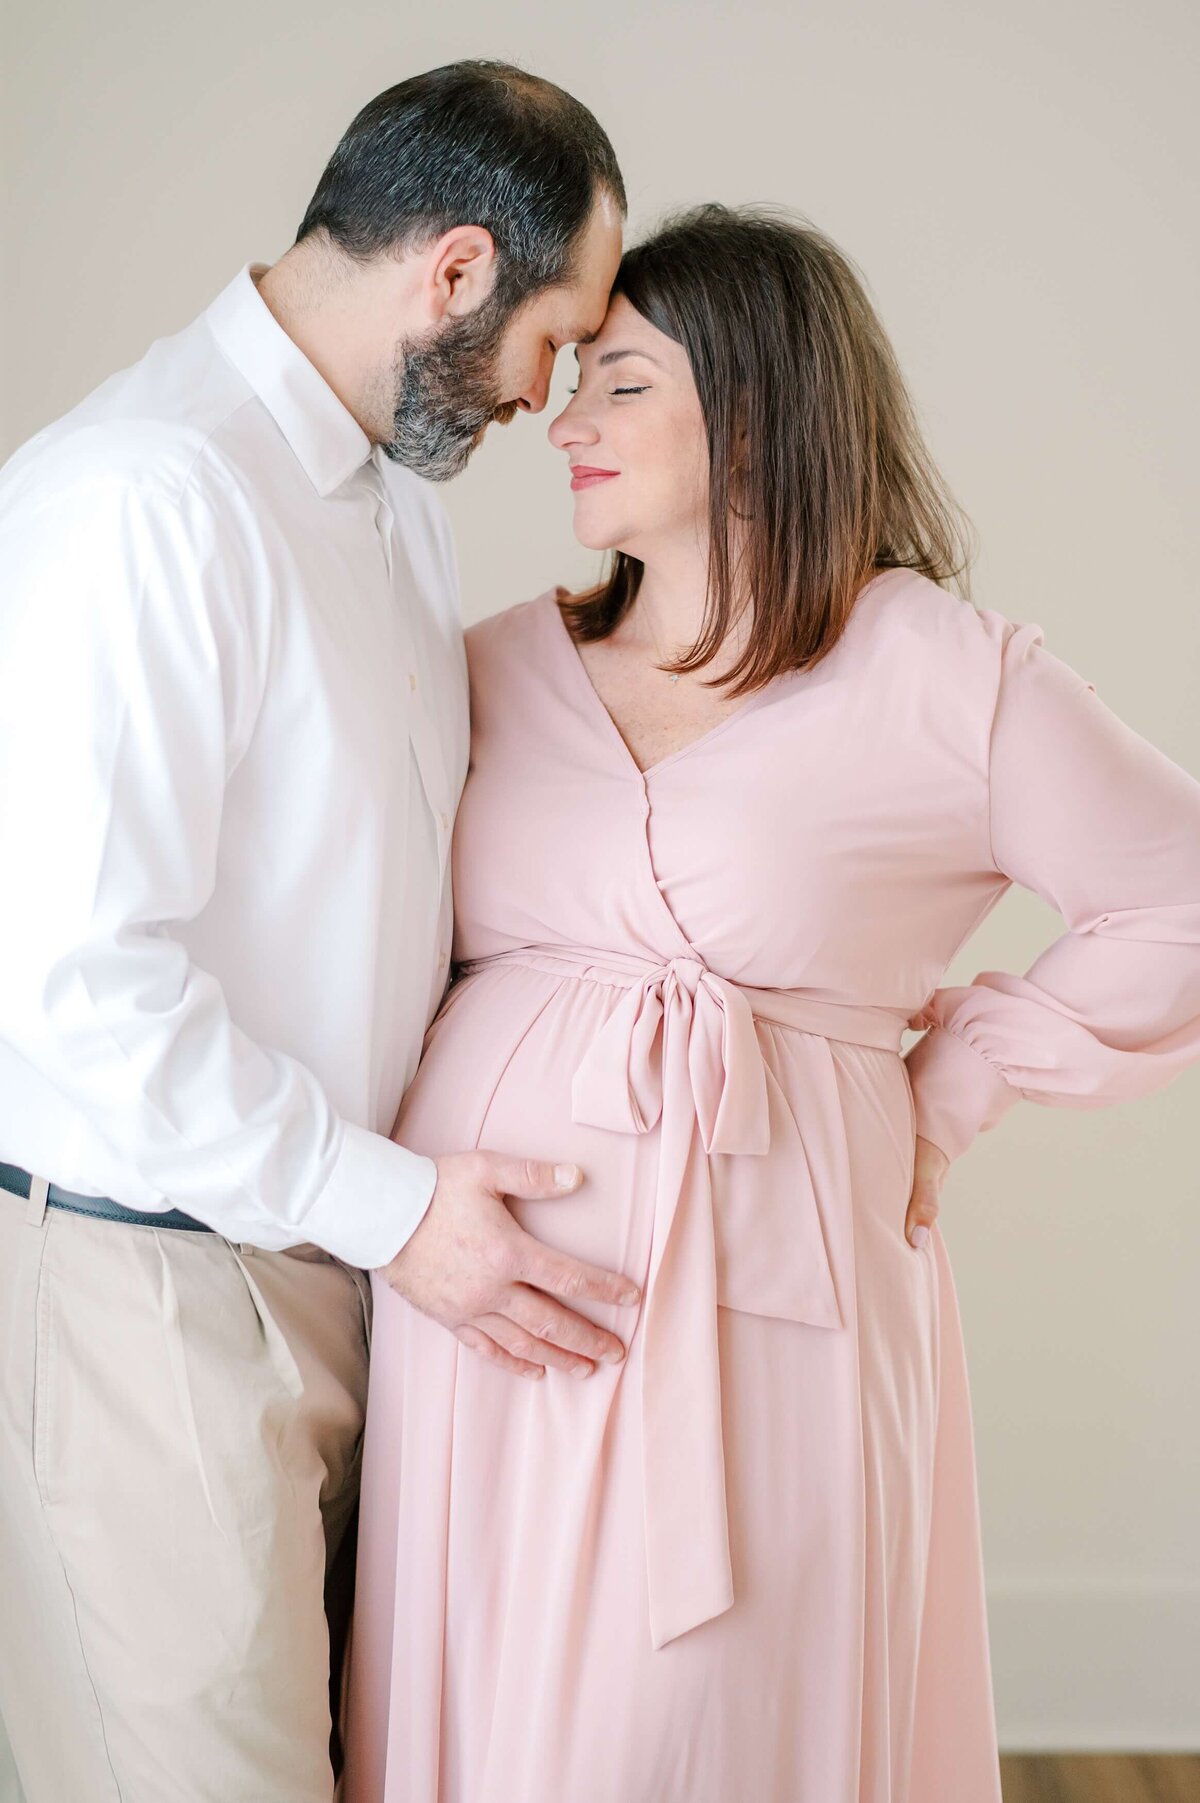 A husband leans his forehead together with his pregnant wife's while lightly touching her baby bump.